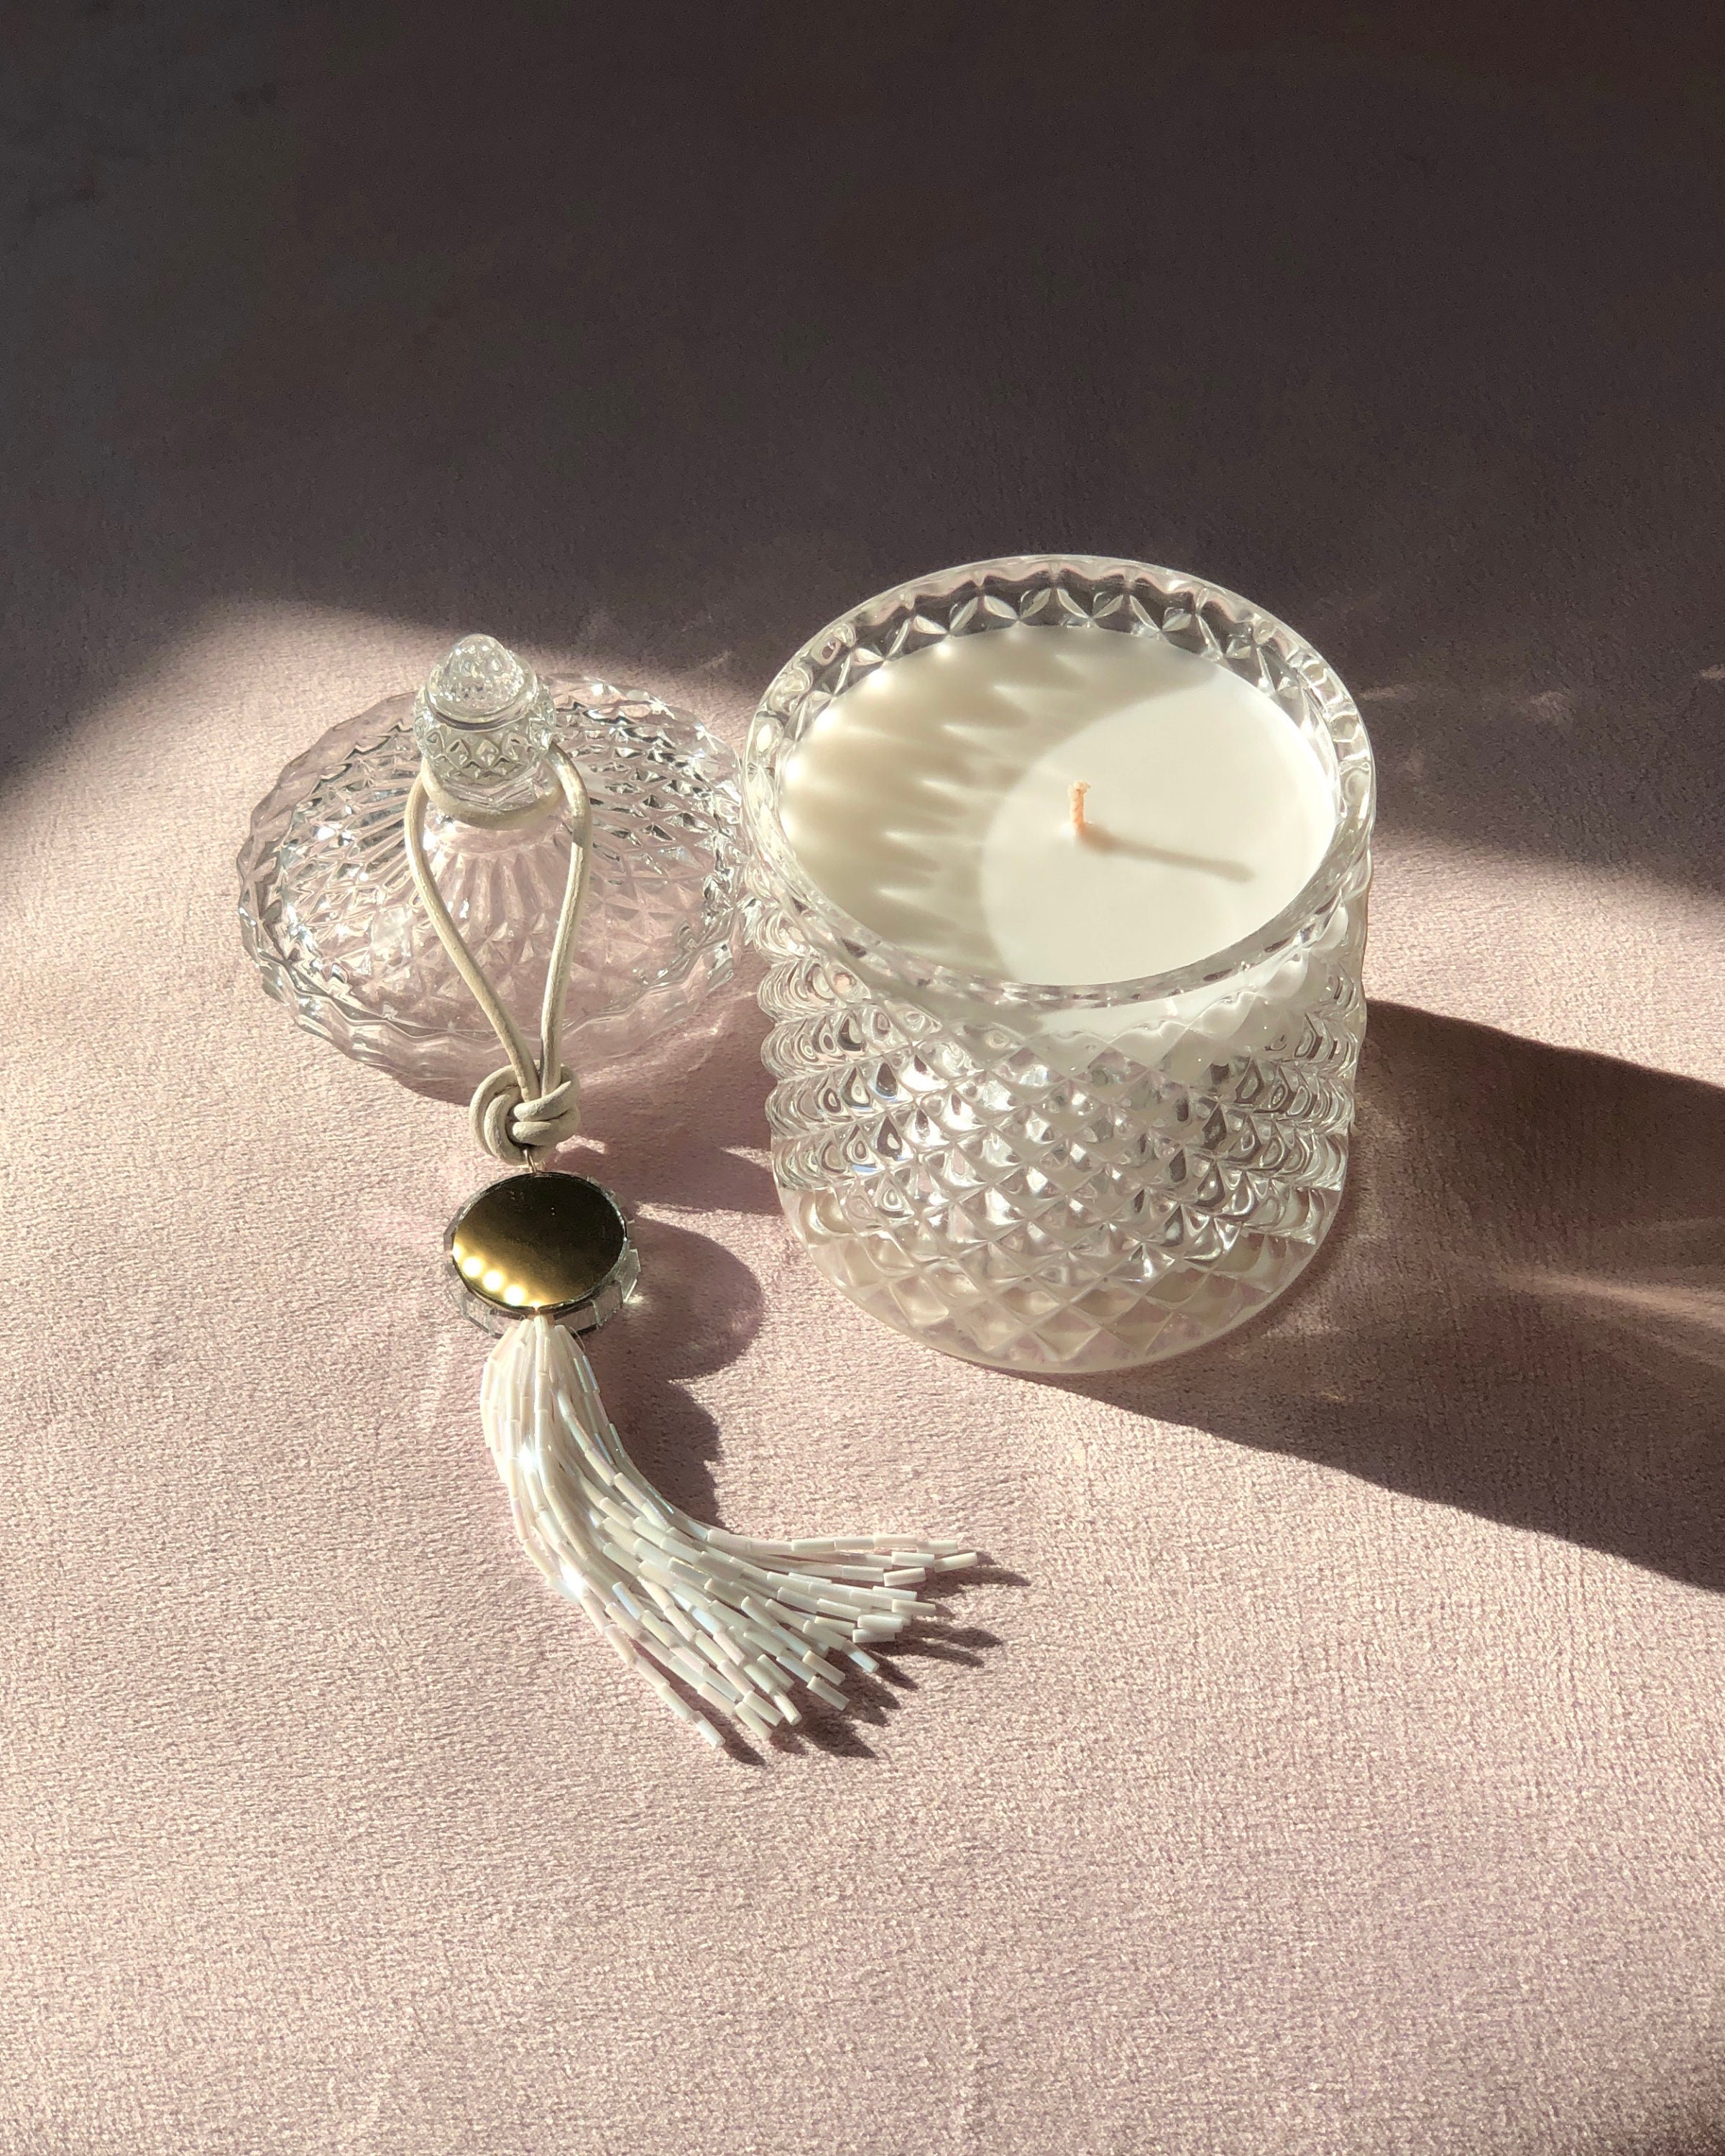 Scented Soy Drops & Soy Beads at Candle Soylutions